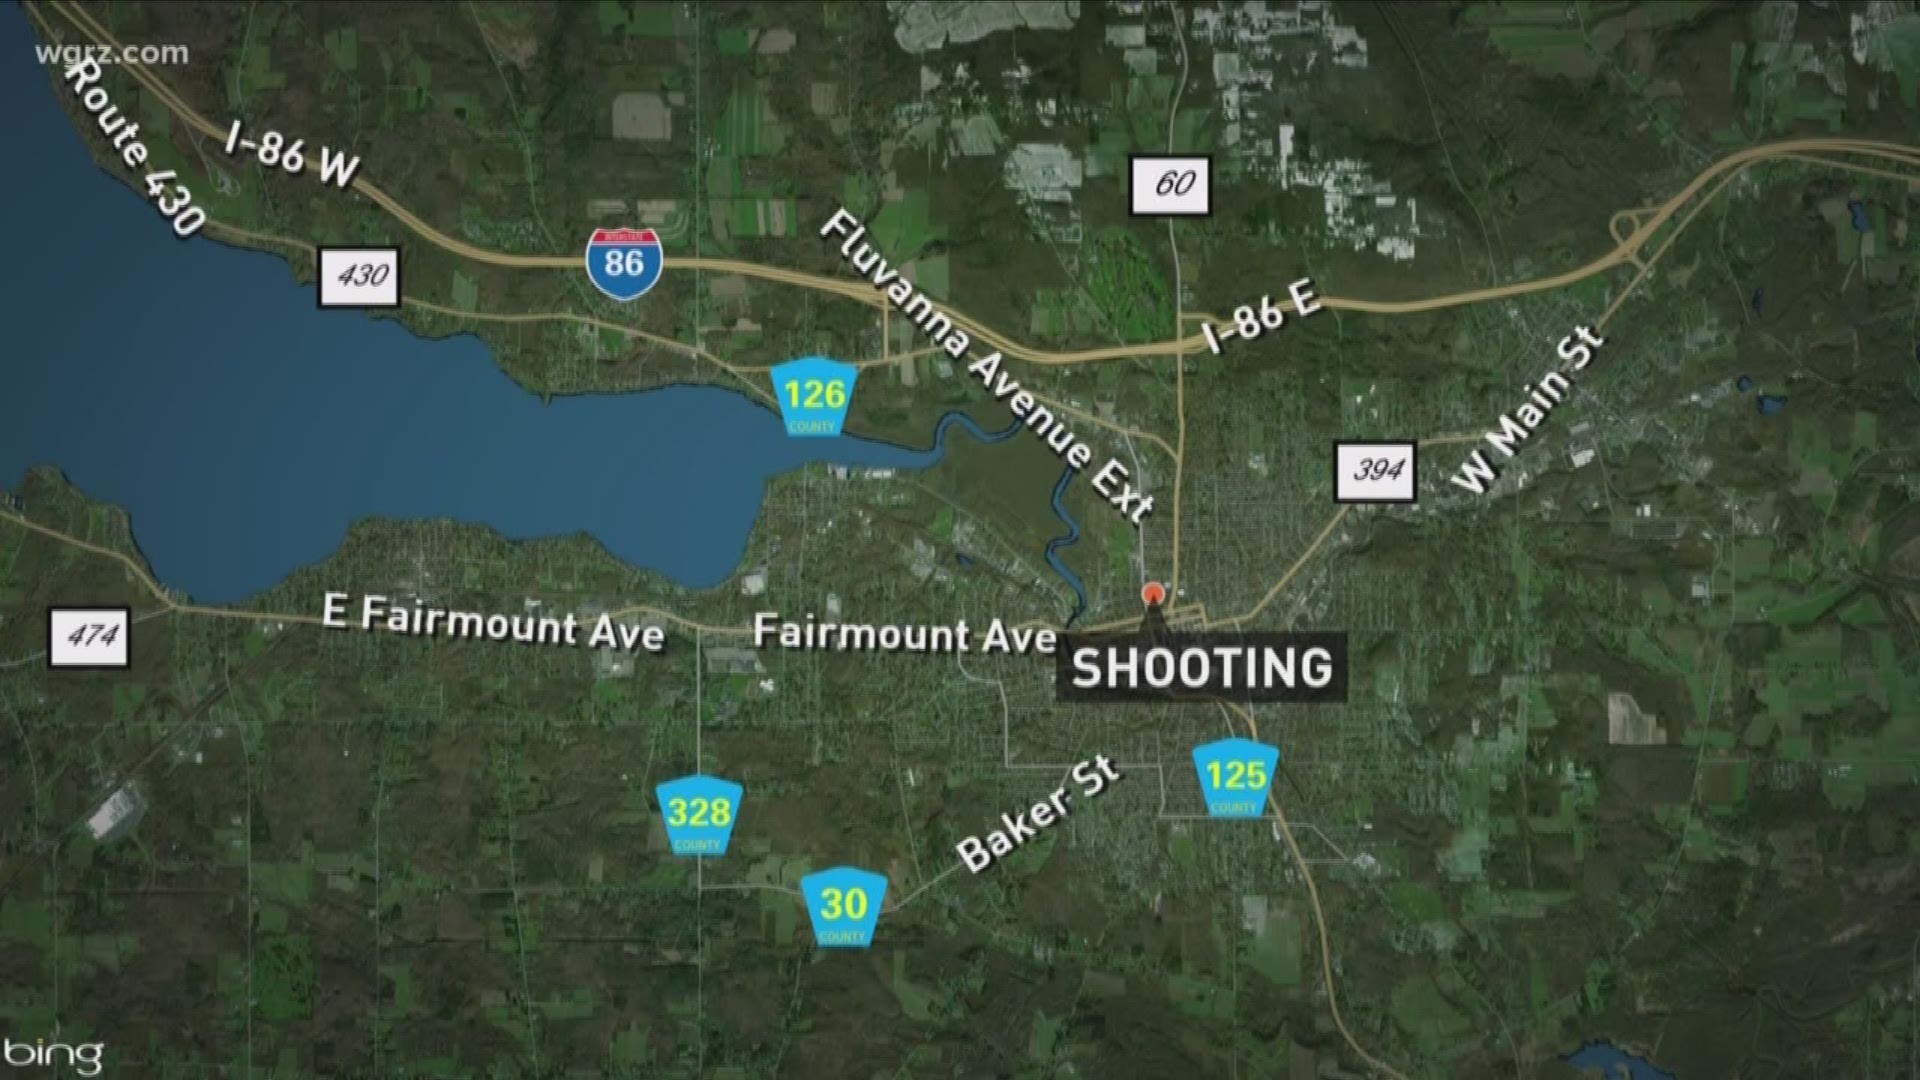 Jamestown police looking for shooter